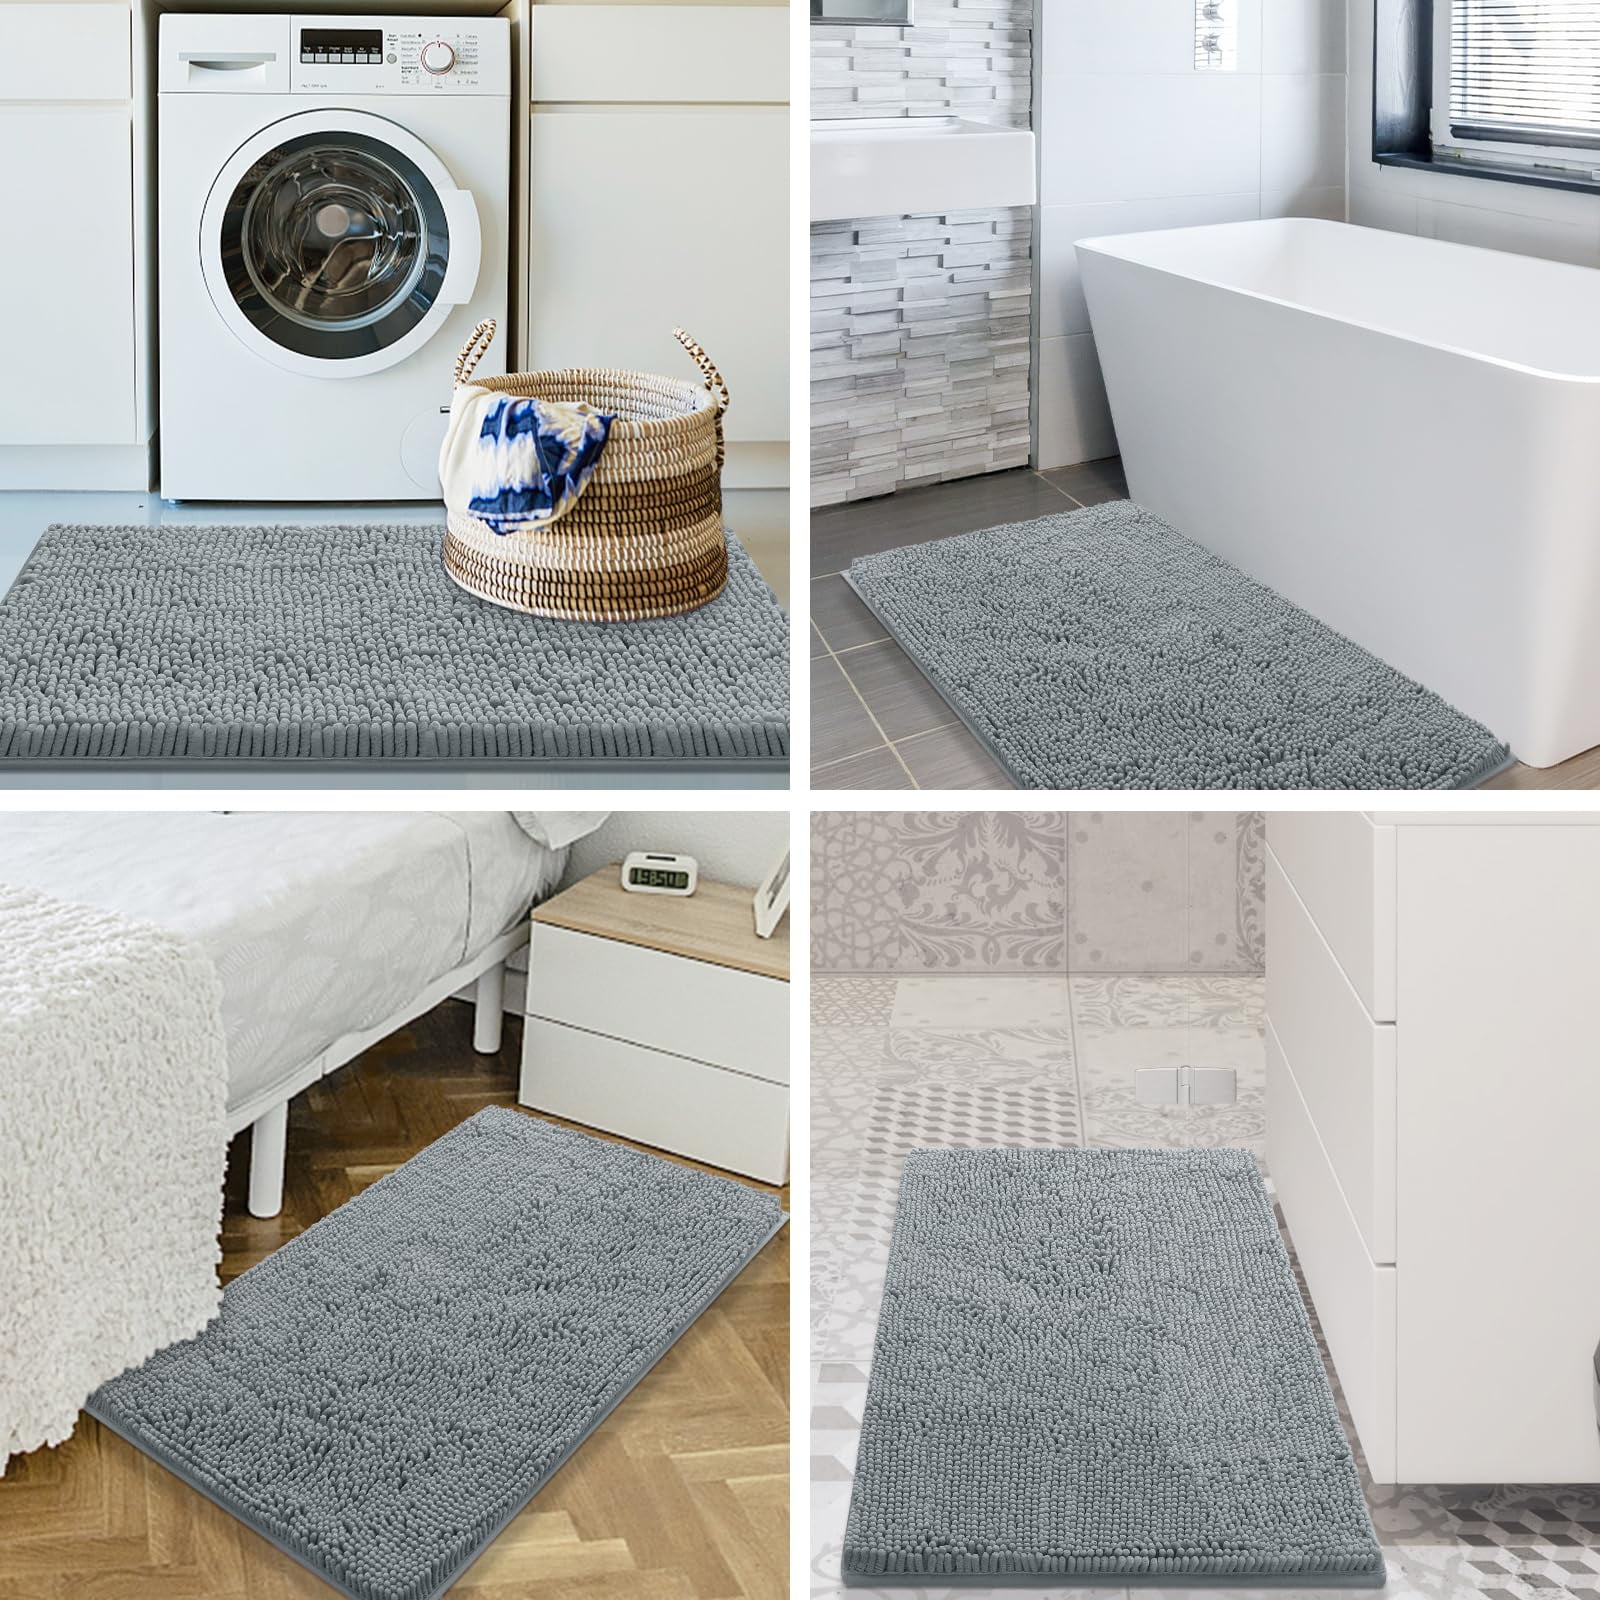 smiry Smiry Luxury chenille Bath Rug, Extra Soft and Absorbent